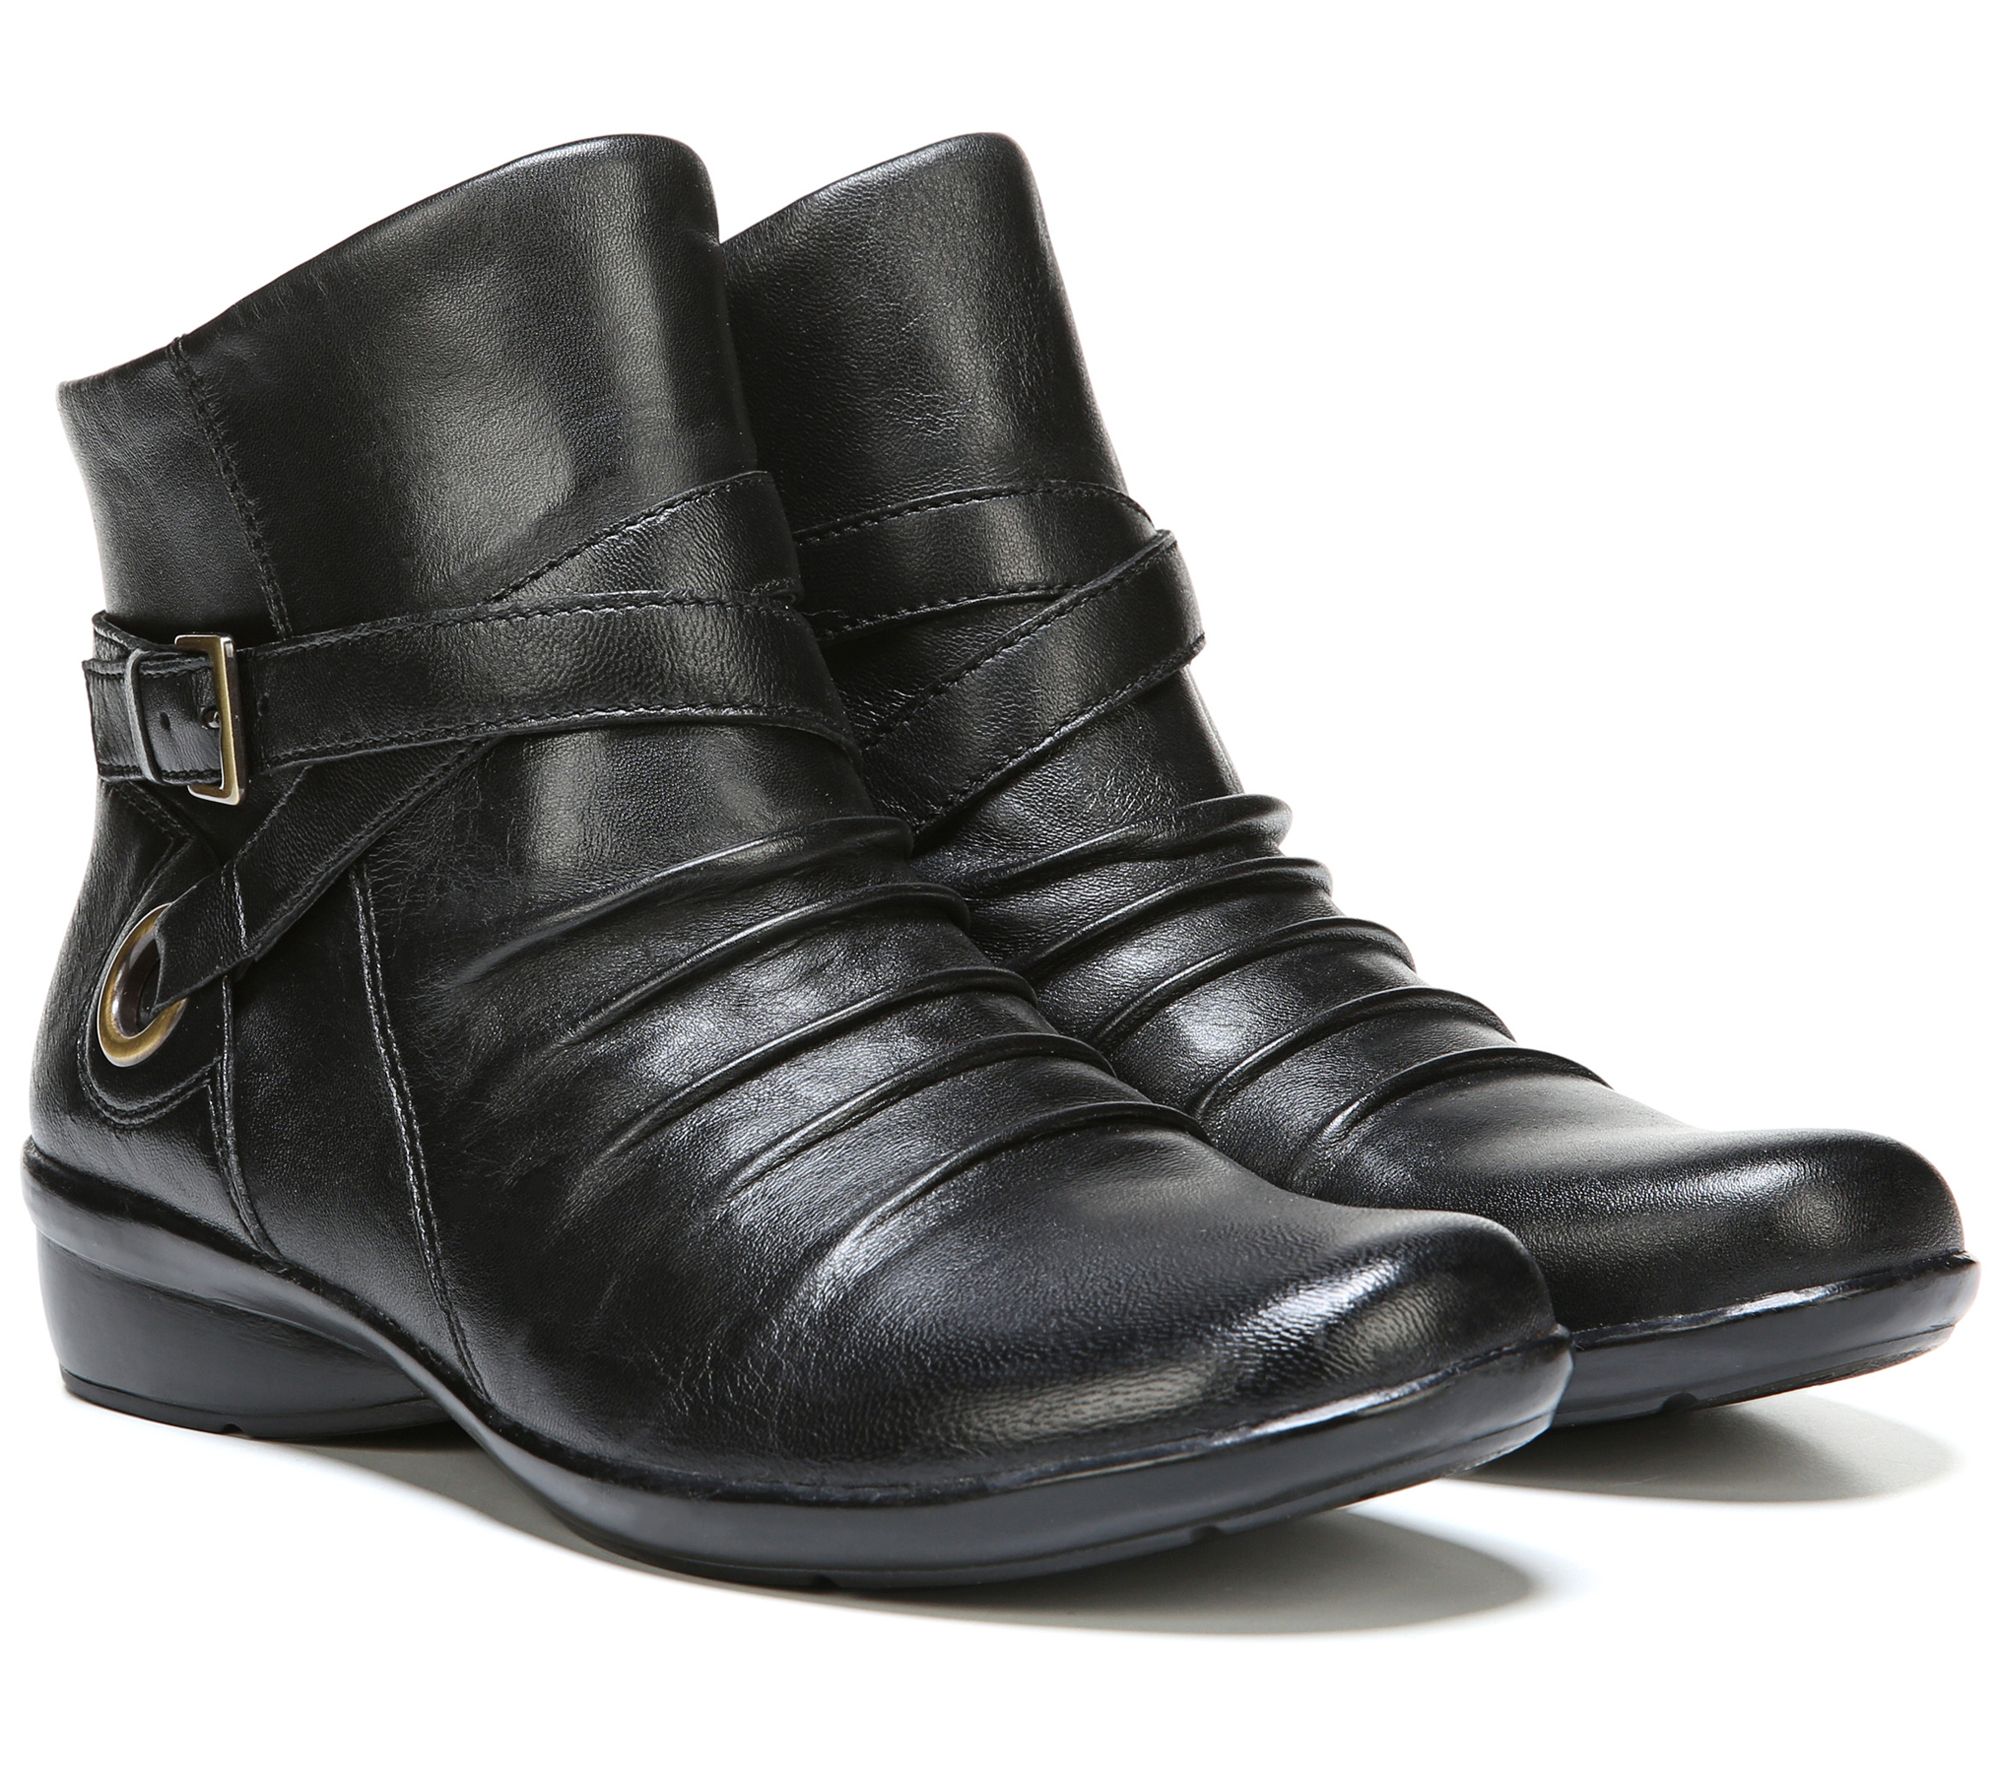 Naturalizer Leather Ankle Boots - Cycle - QVC.com